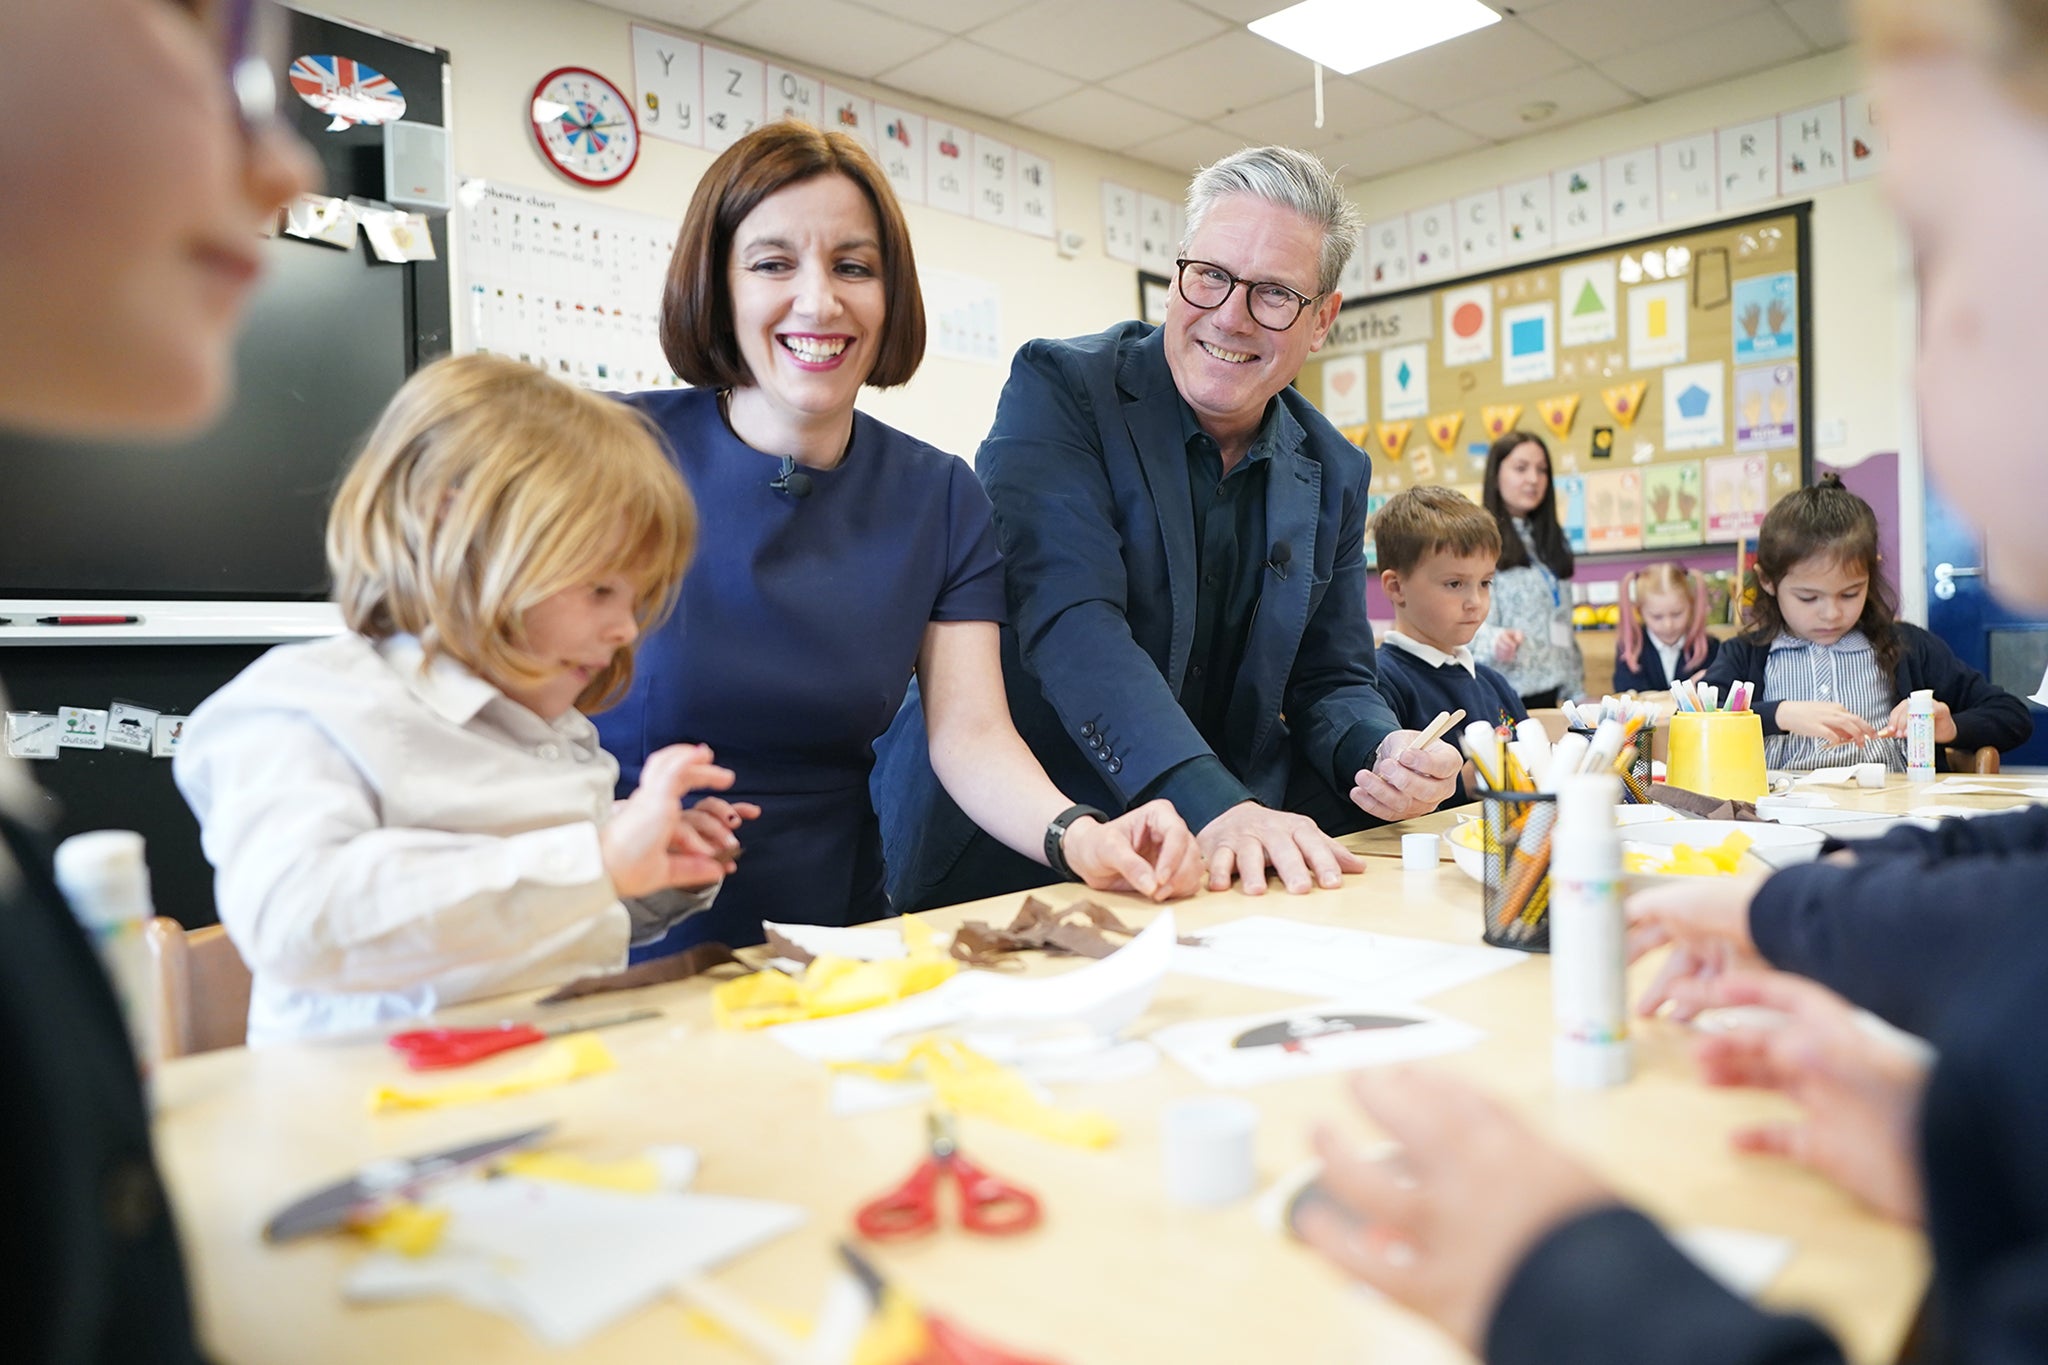 Labour leader Sir Keir Starmer and shadow education secretary Bridget Phillipson on a visit to Nursery Hill Primary School in Nuneaton in Warwickshire